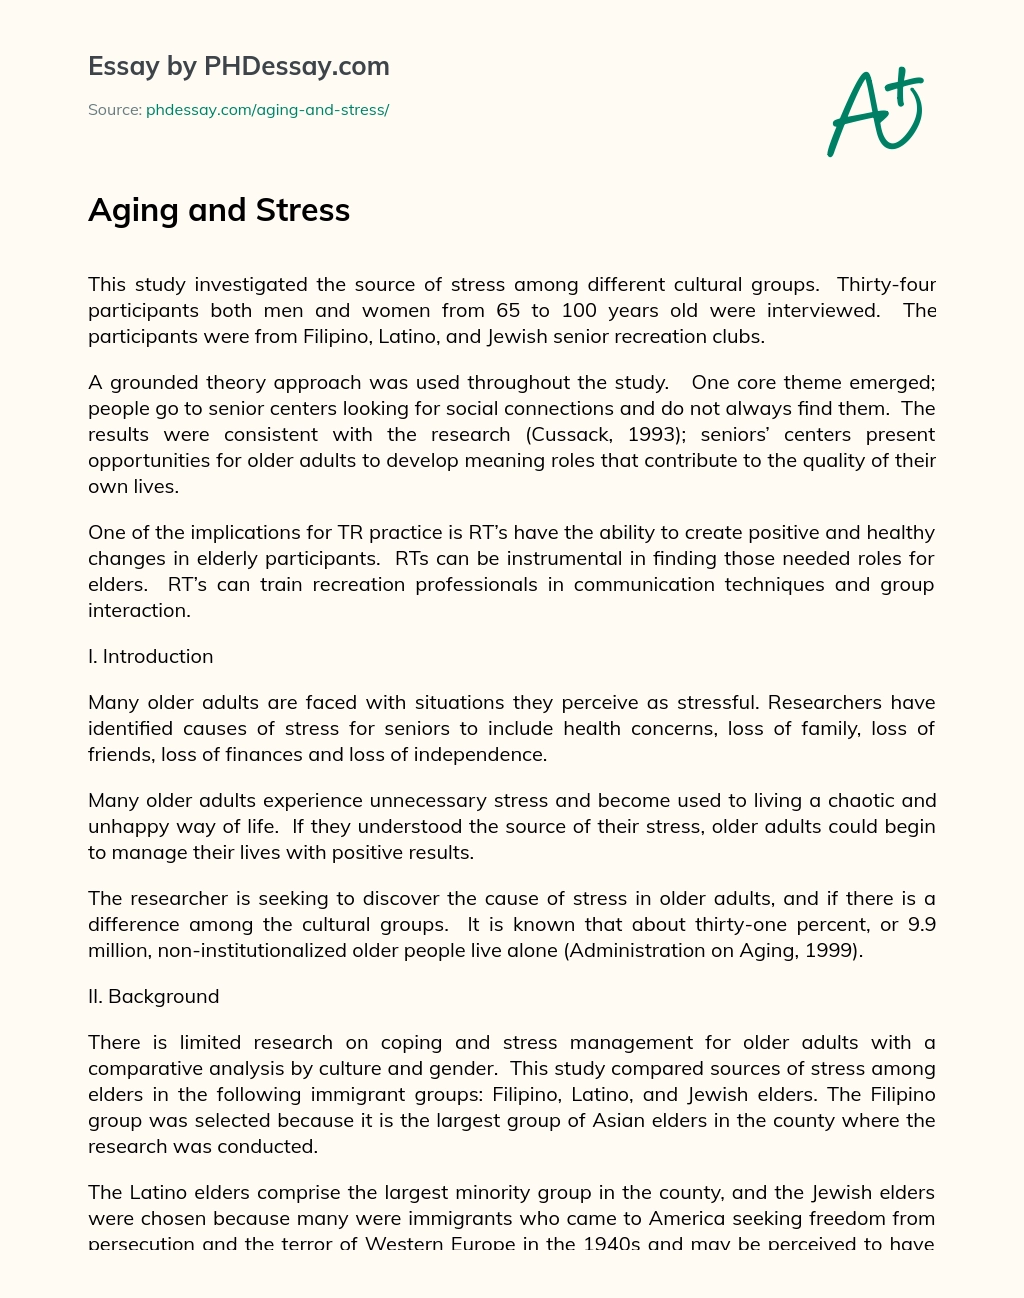 Aging and Stress essay